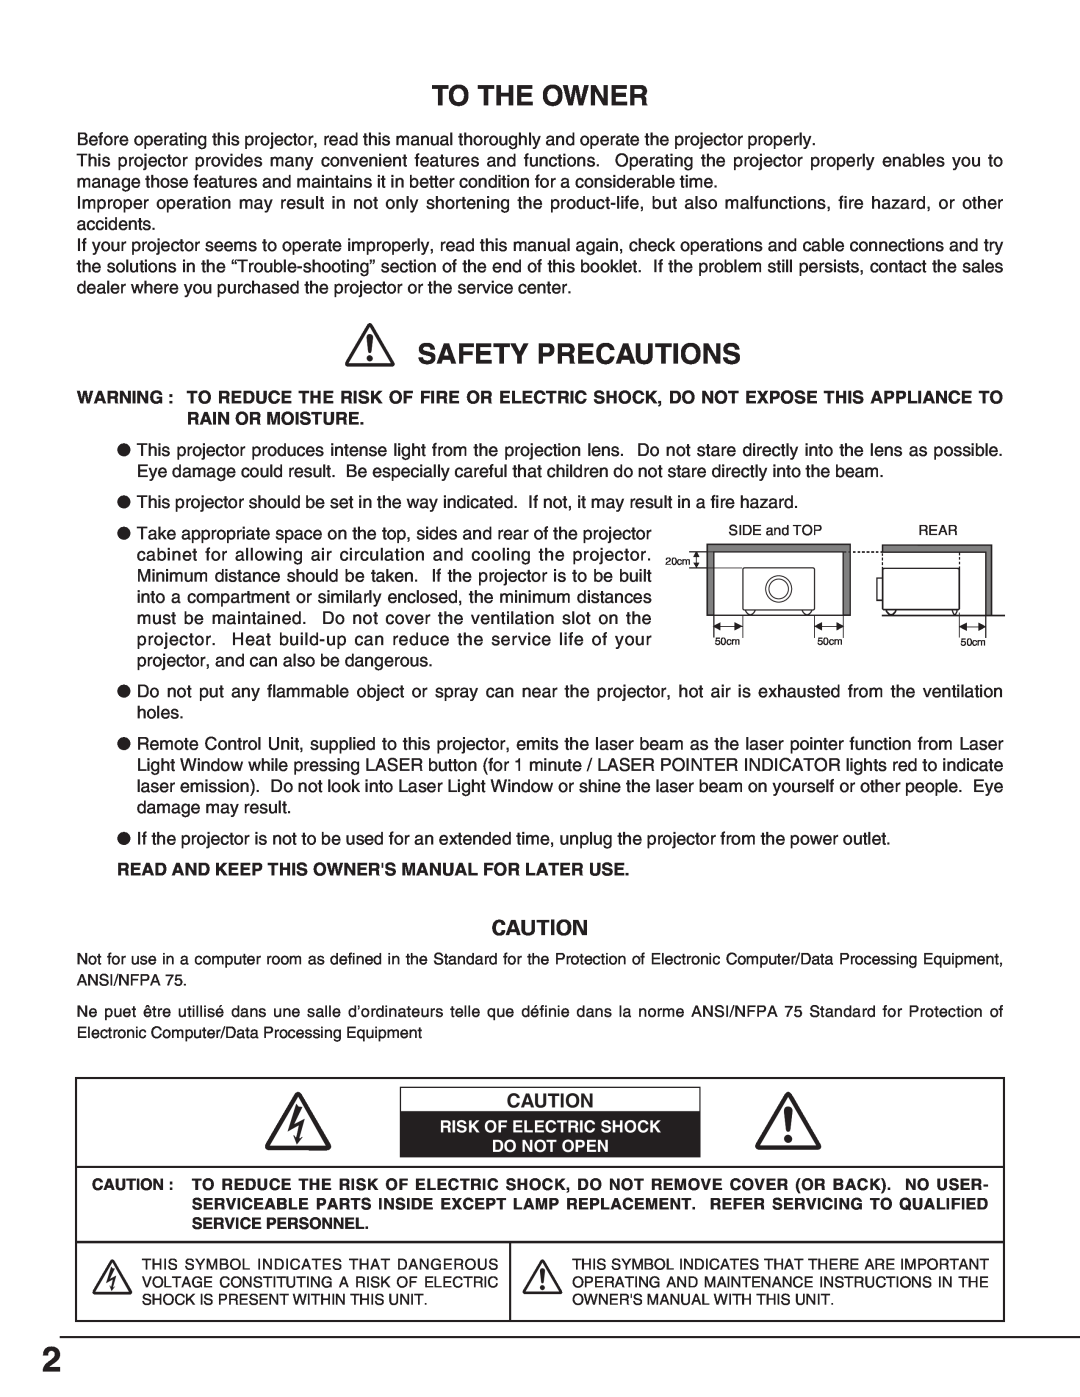 Eiki LC-X70 instruction manual To The Owner, Safety Precautions, Read And Keep This Owners Manual For Later Use 